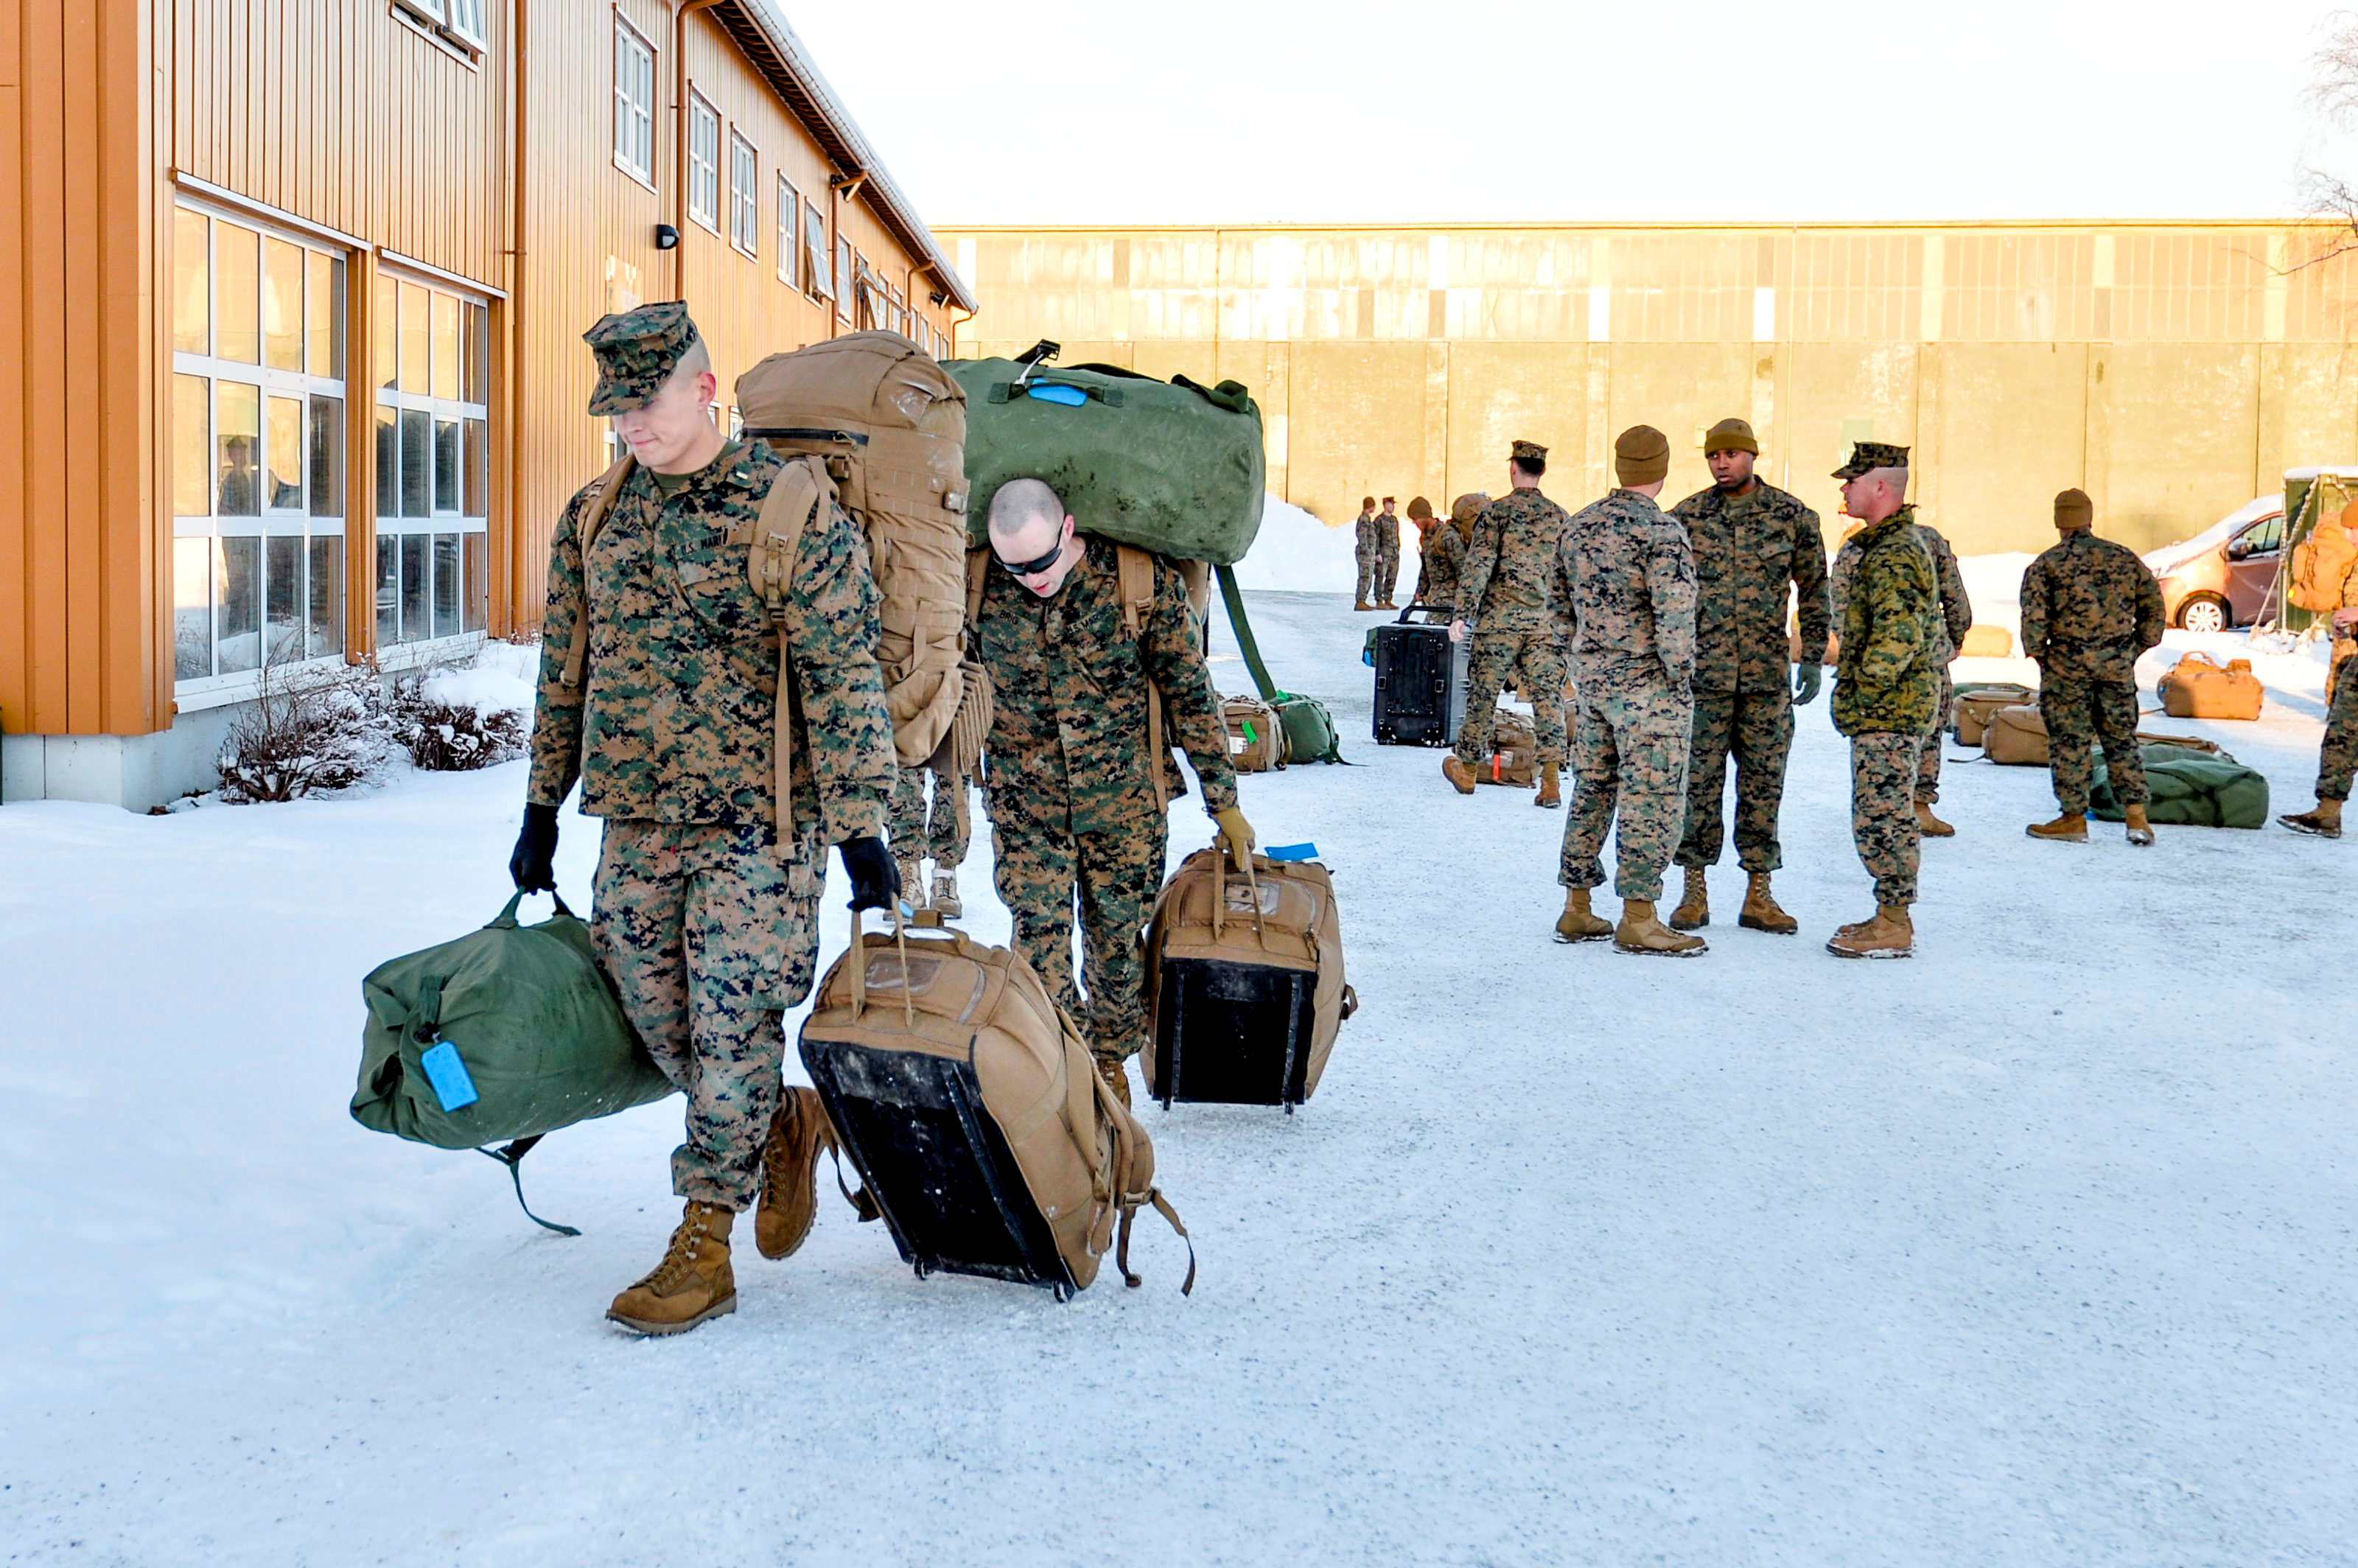 U.S. Marines, who are to attend a six-month training to learn about winter warfare, arrive in Stjordal, Norway January 16, 2017. NTB Scanpix/Ned Alley/via REUTERS